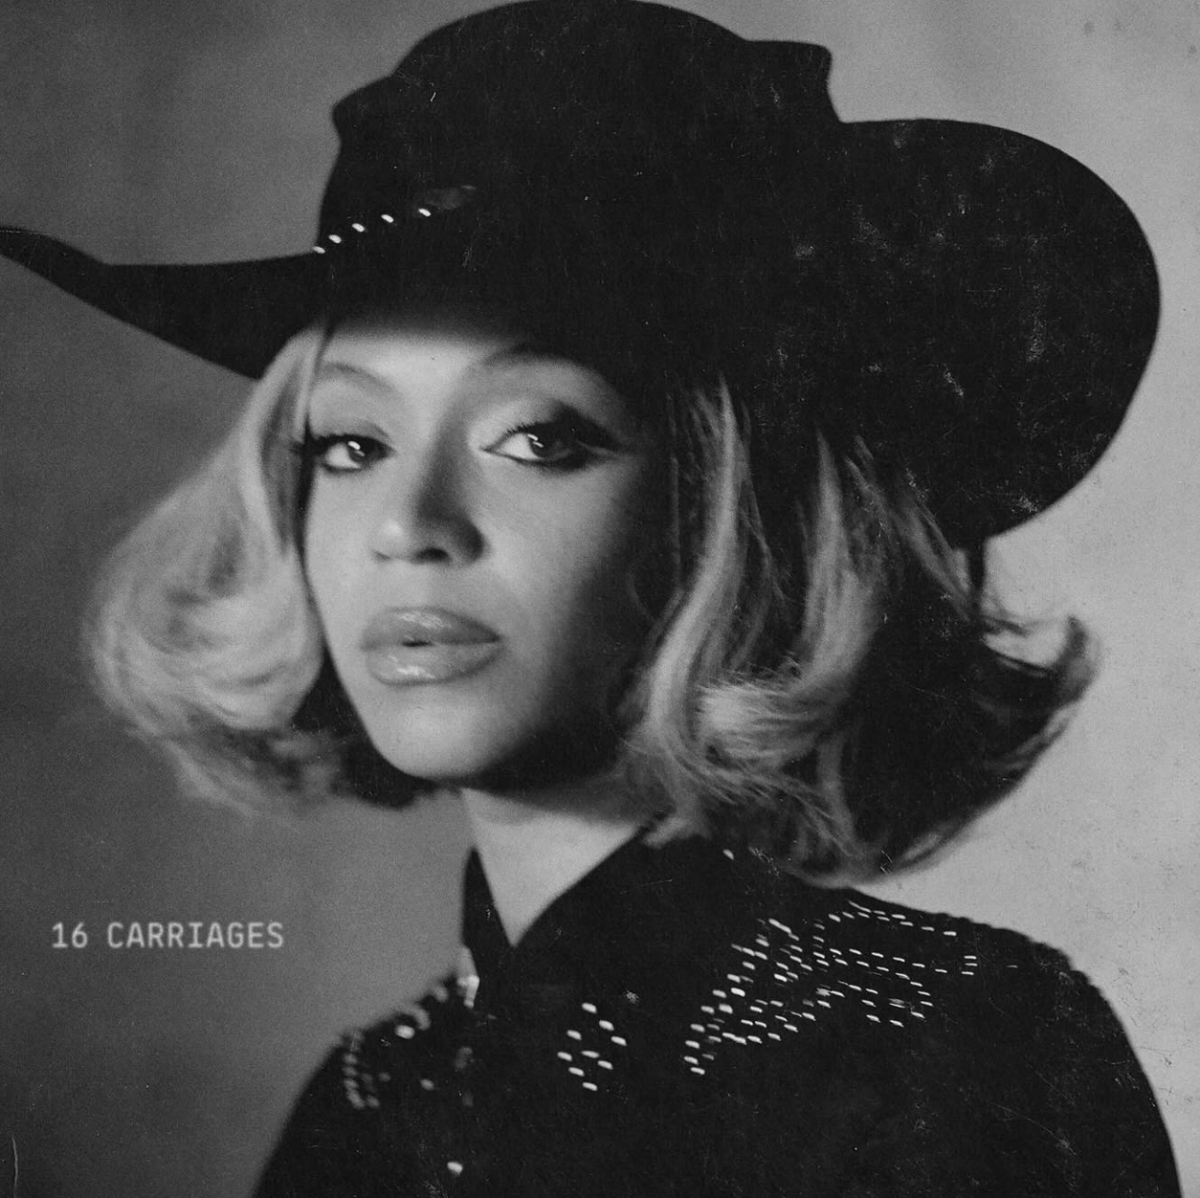 Image+sourced+from+%40beyonce+on+Instagram